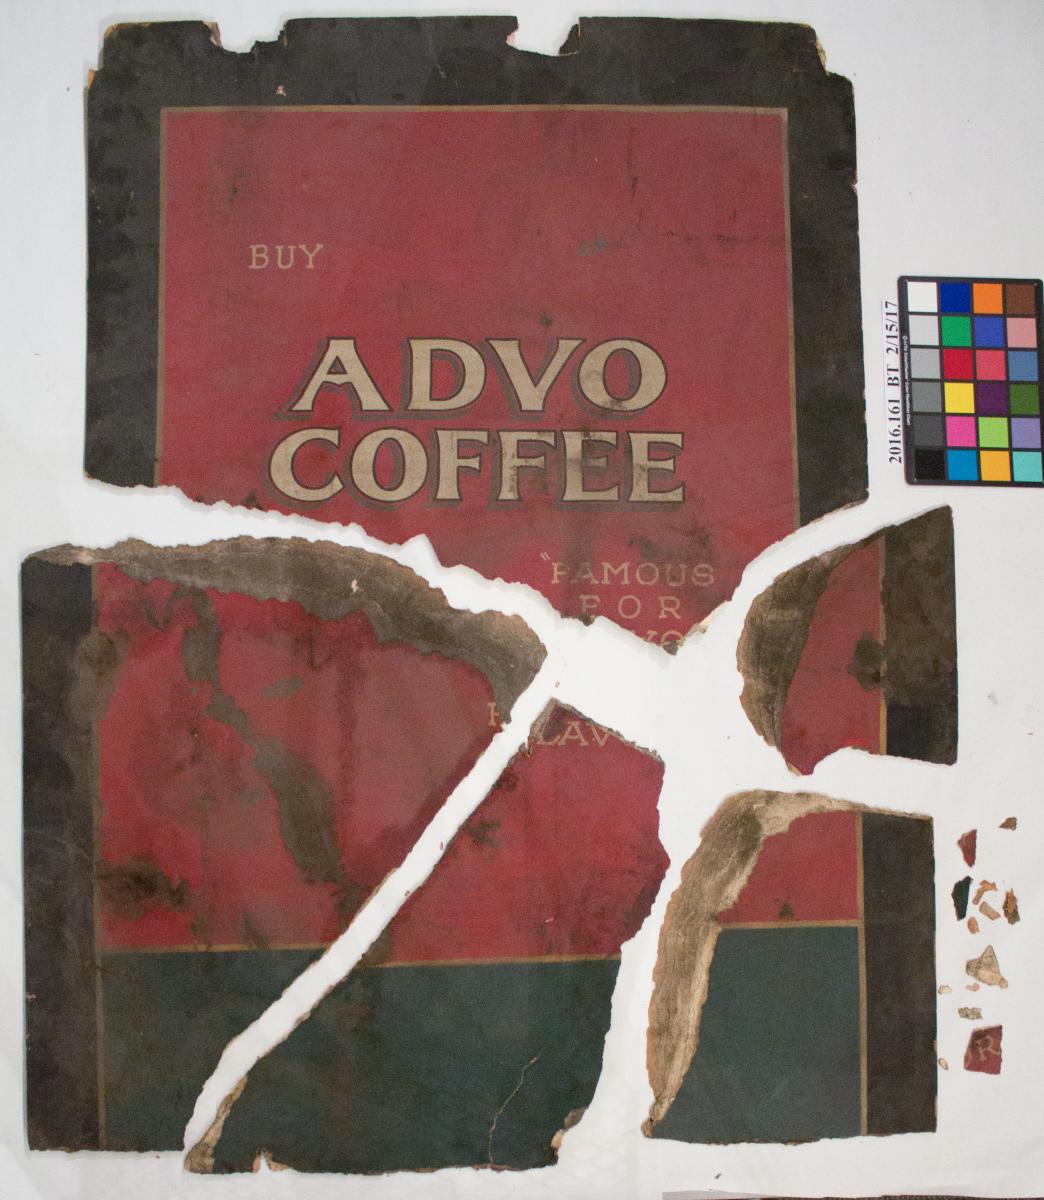 Coffee ad before treatment, in pieces, covered in dirt